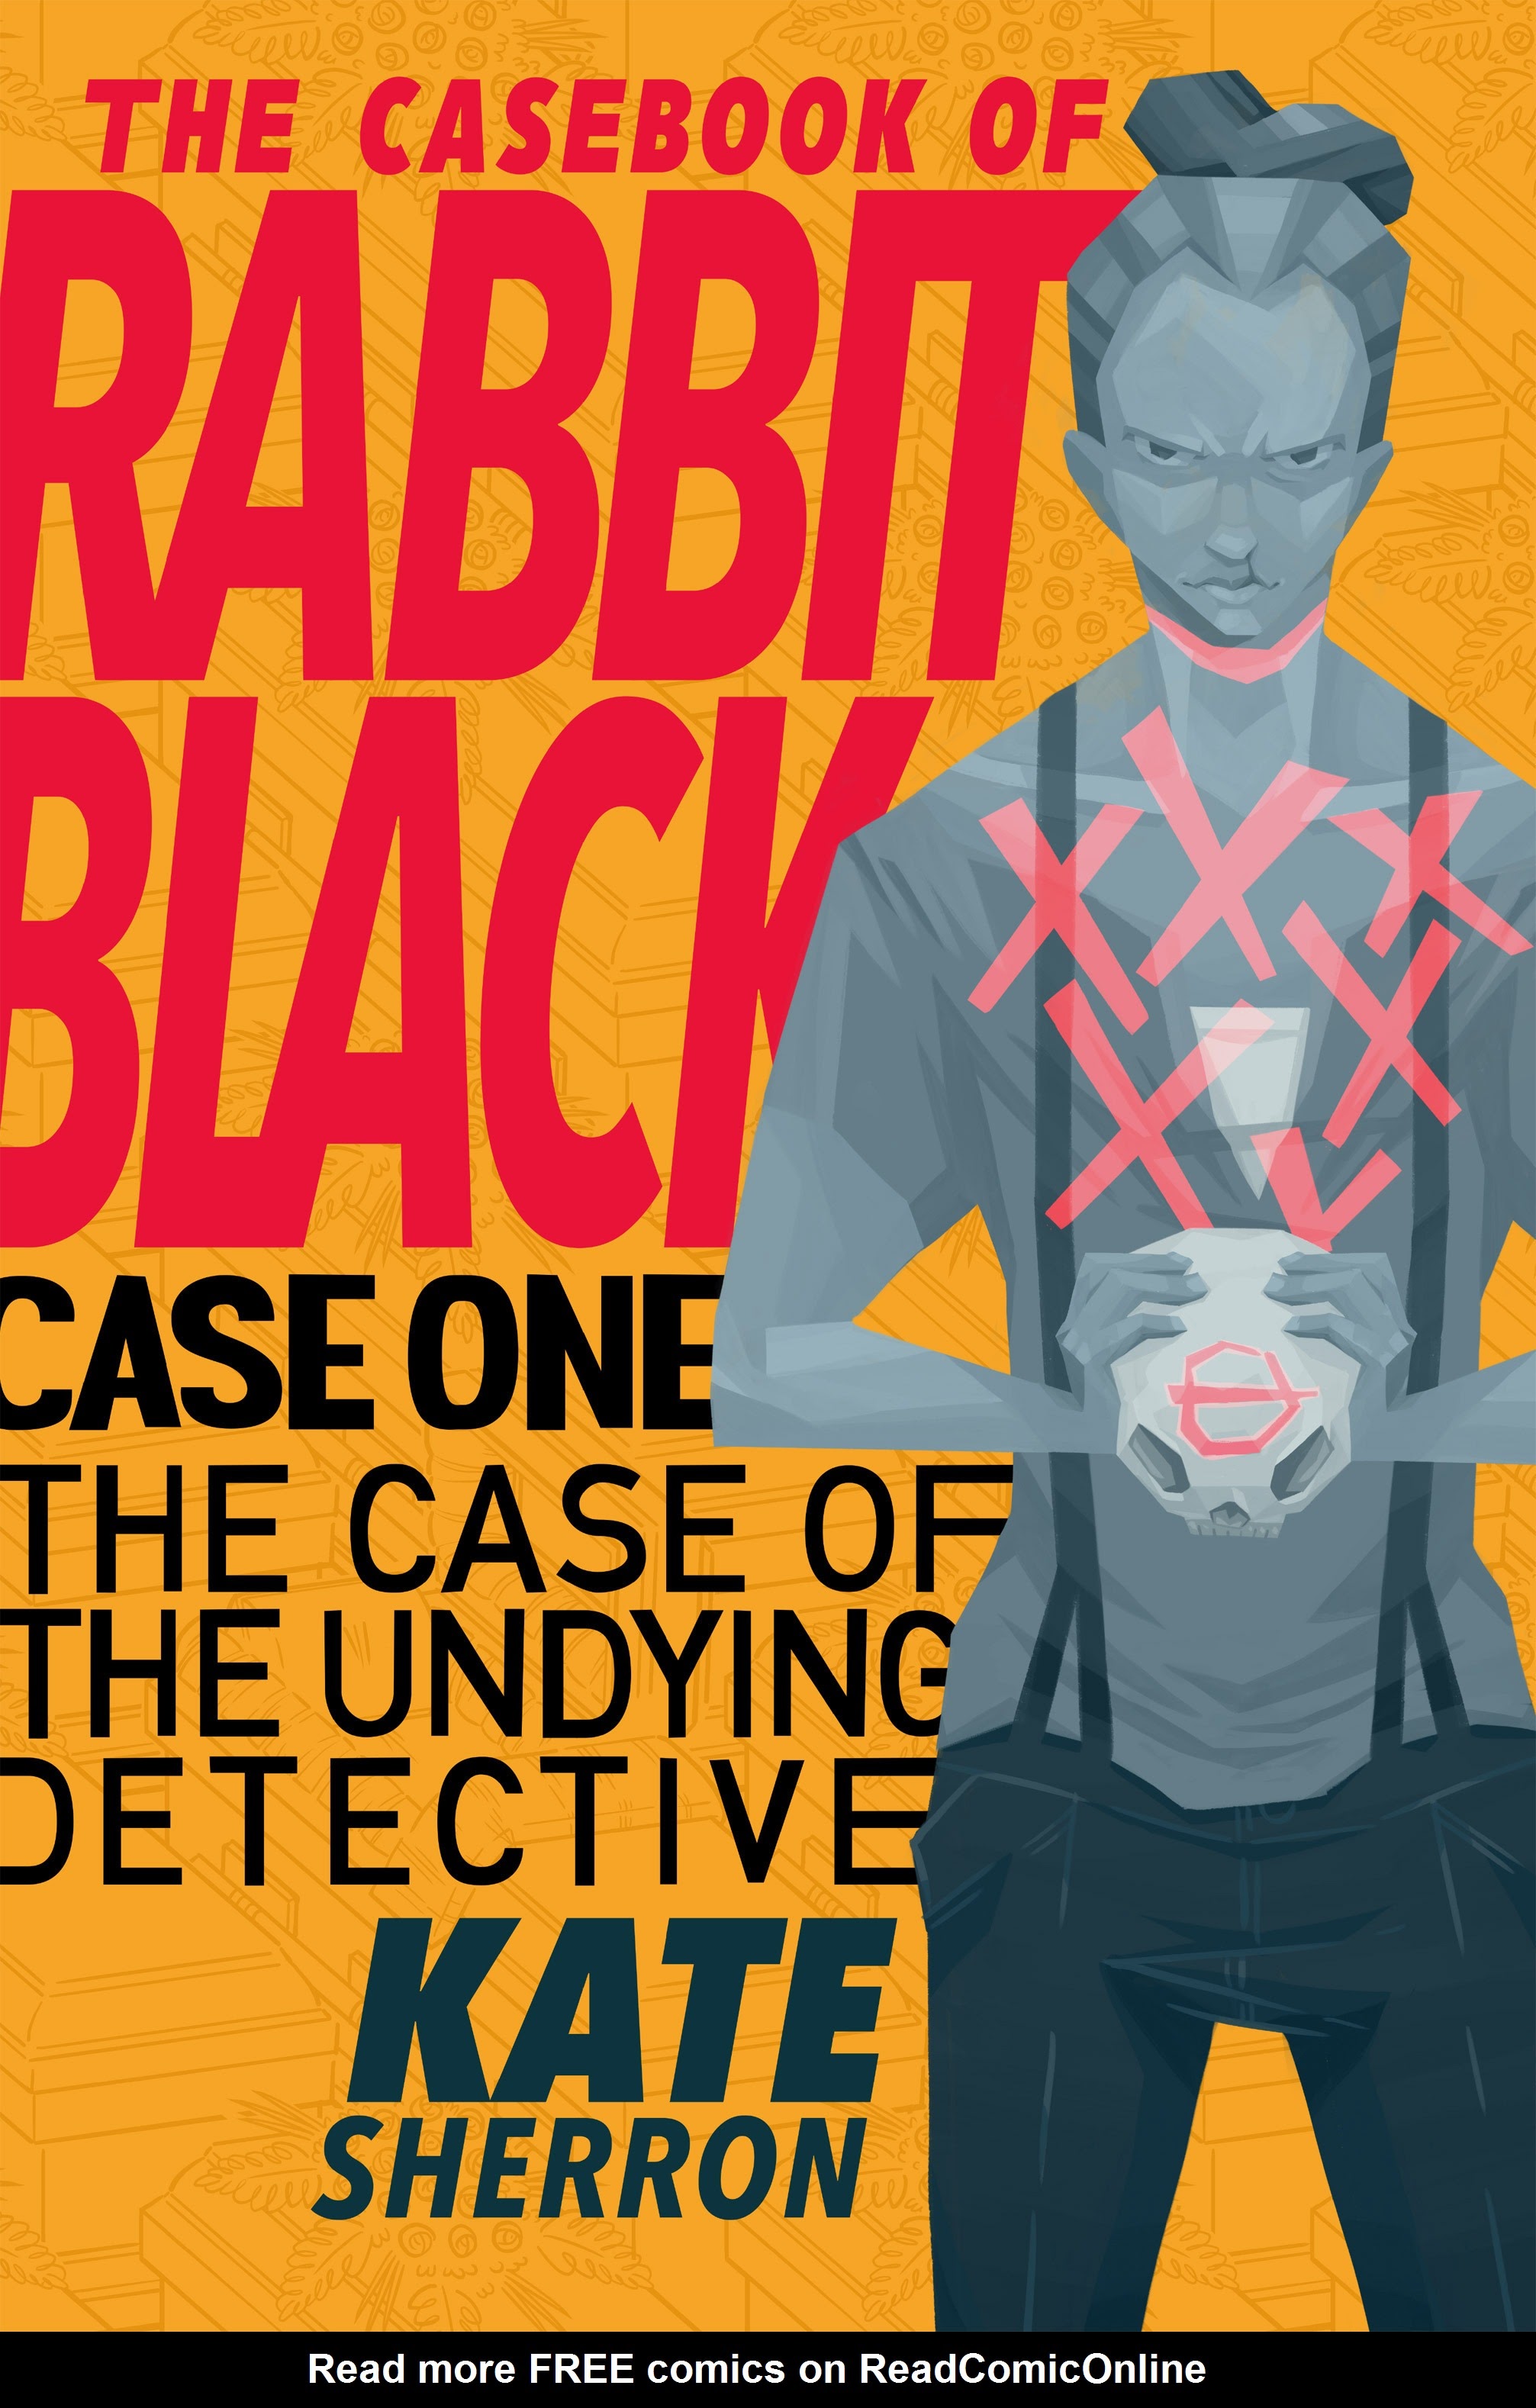 Read online The Casebook of Rabbit Black comic -  Issue #1 - 1